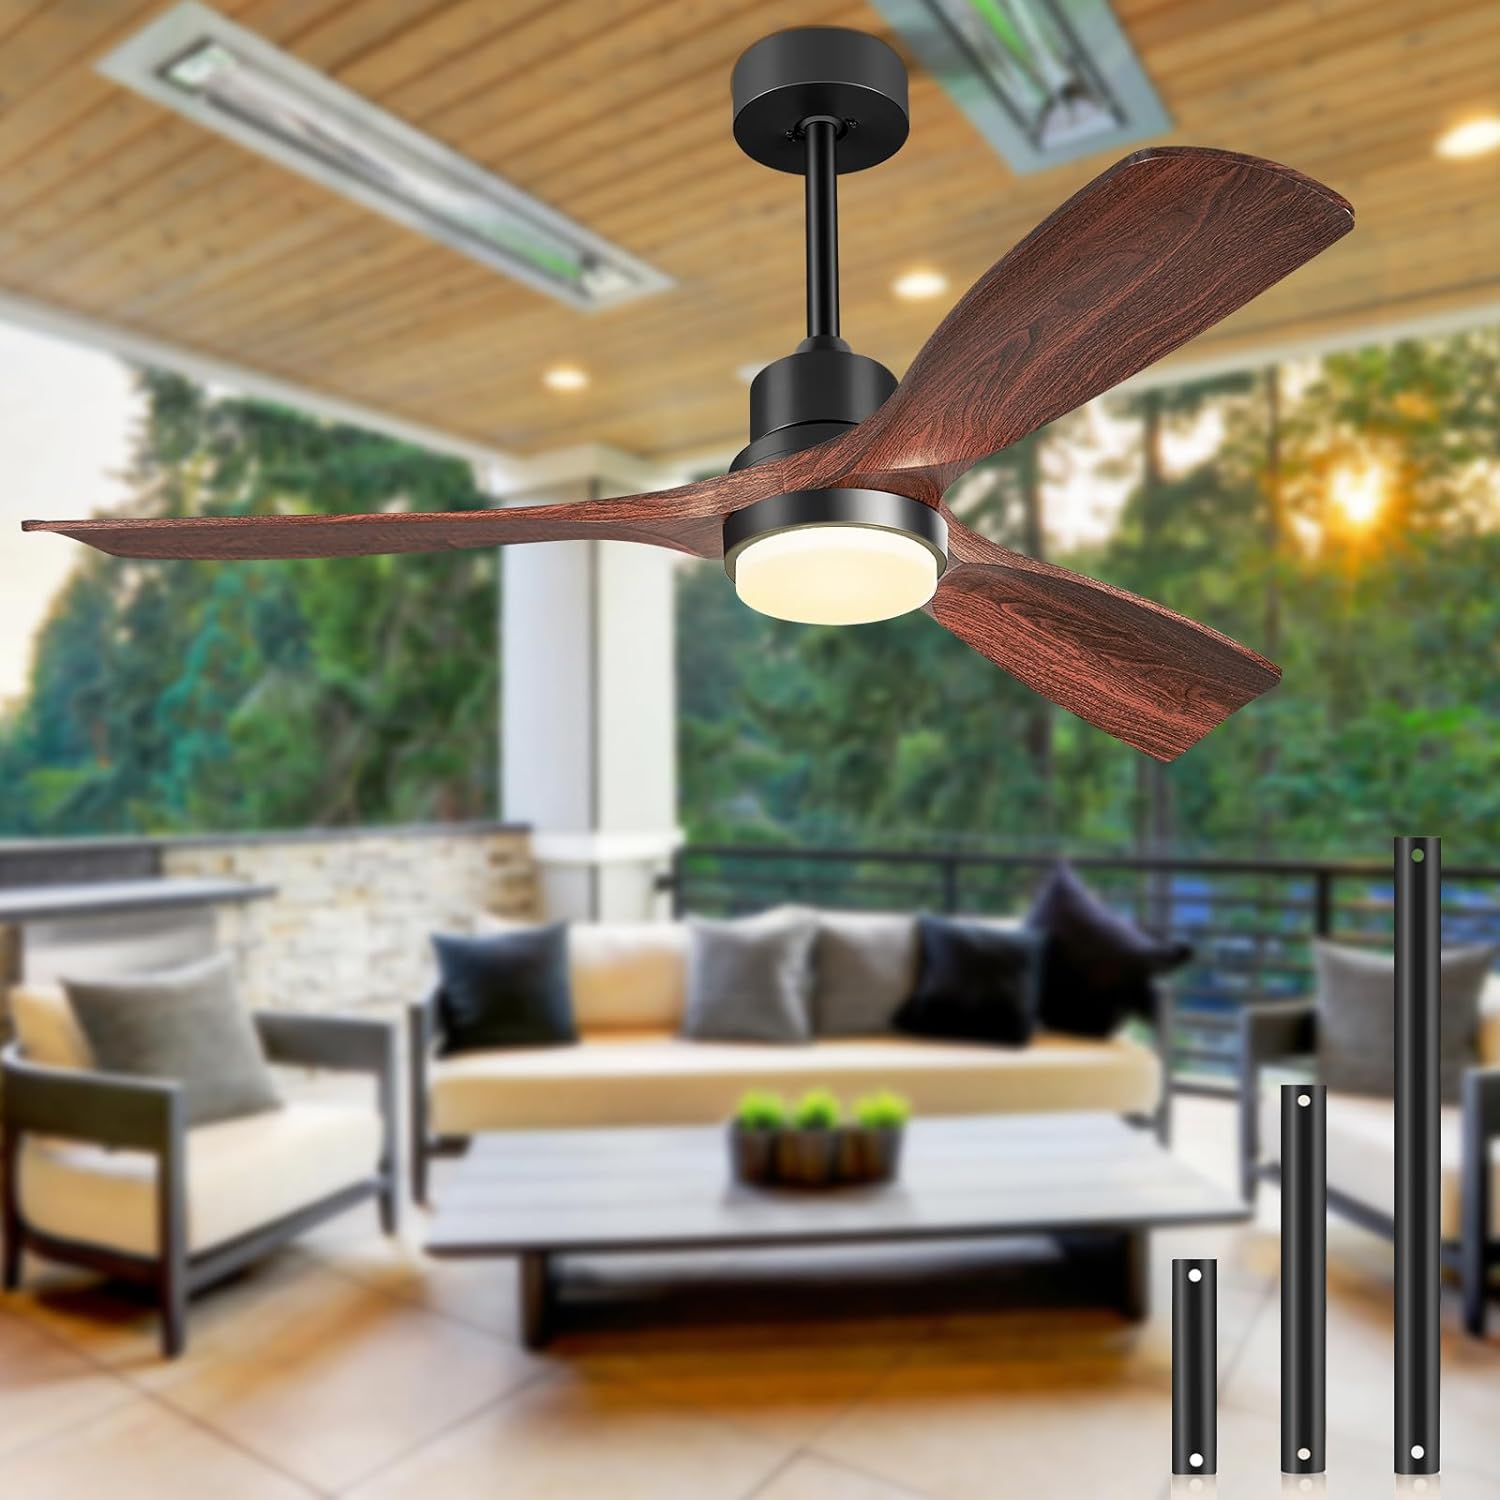 Ceiling Fans with Lights and Remote, 52 Inch Outdoor Ceiling Fan for Patios with Light 3 Downrods, 3 Blades Modern Ceiling Fan Noiseless Reversible DC Motor, Wood Fan for Farmhouse